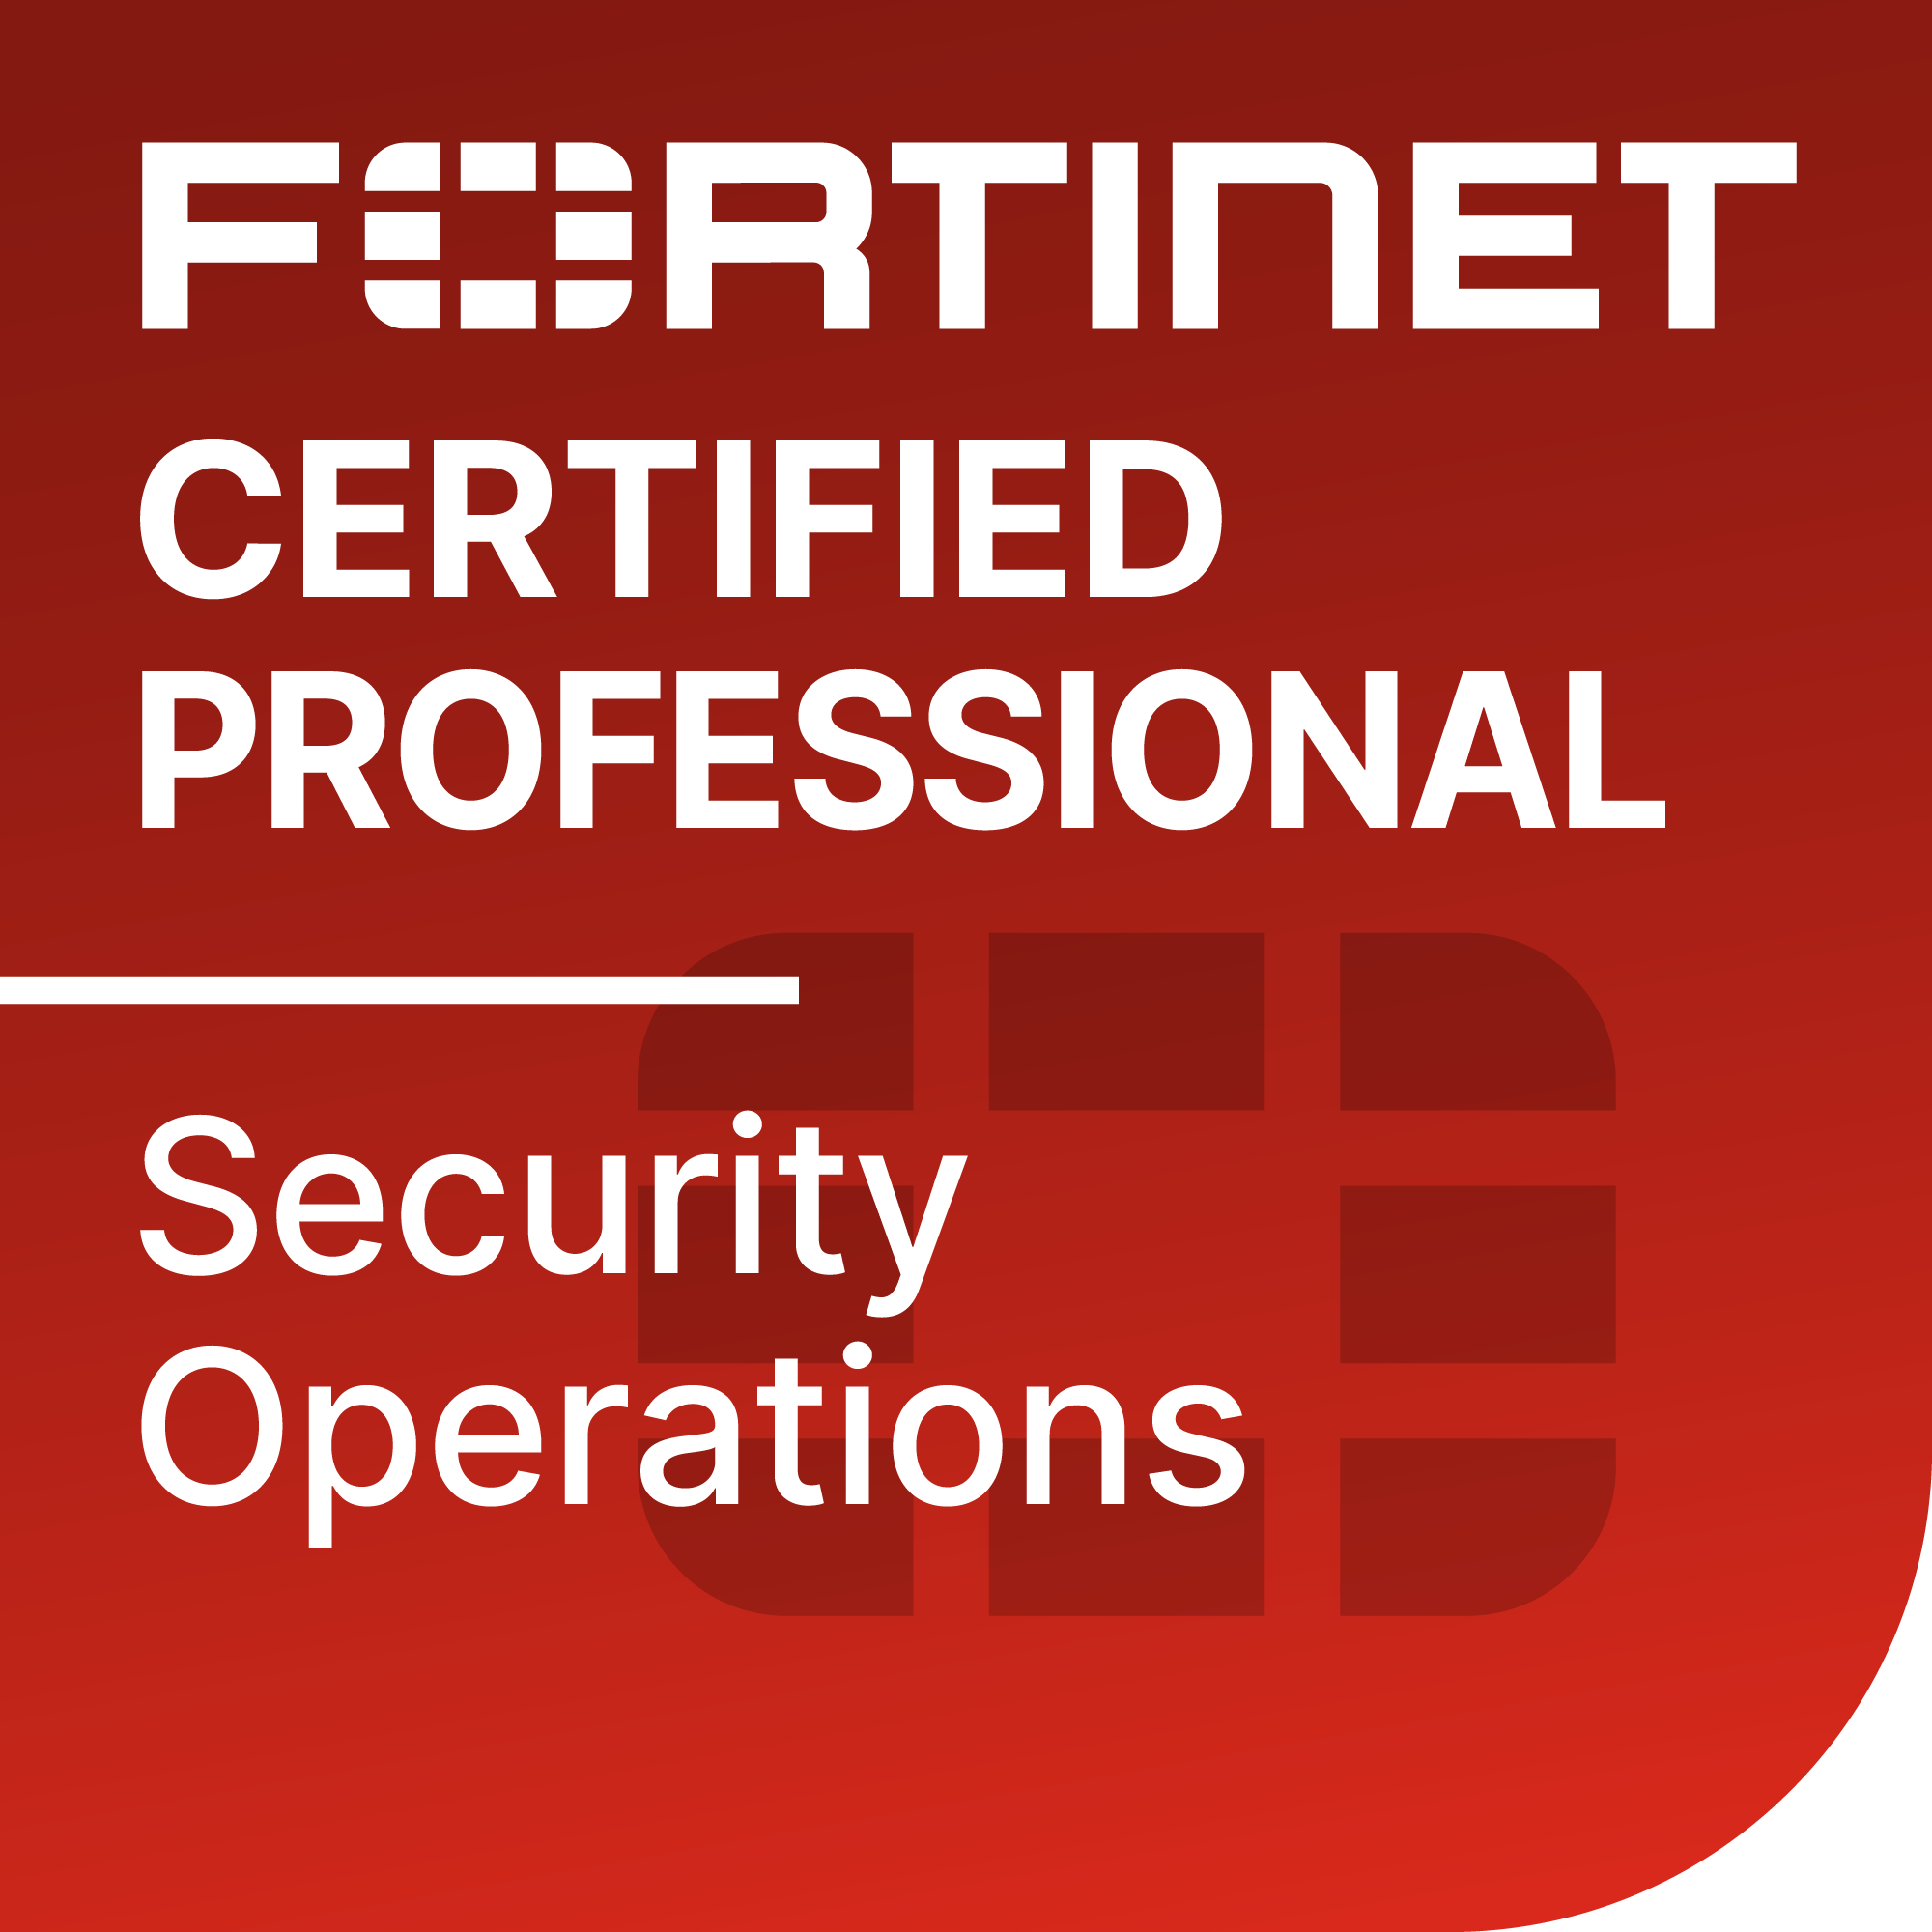 ftnt nse cert professional security ops